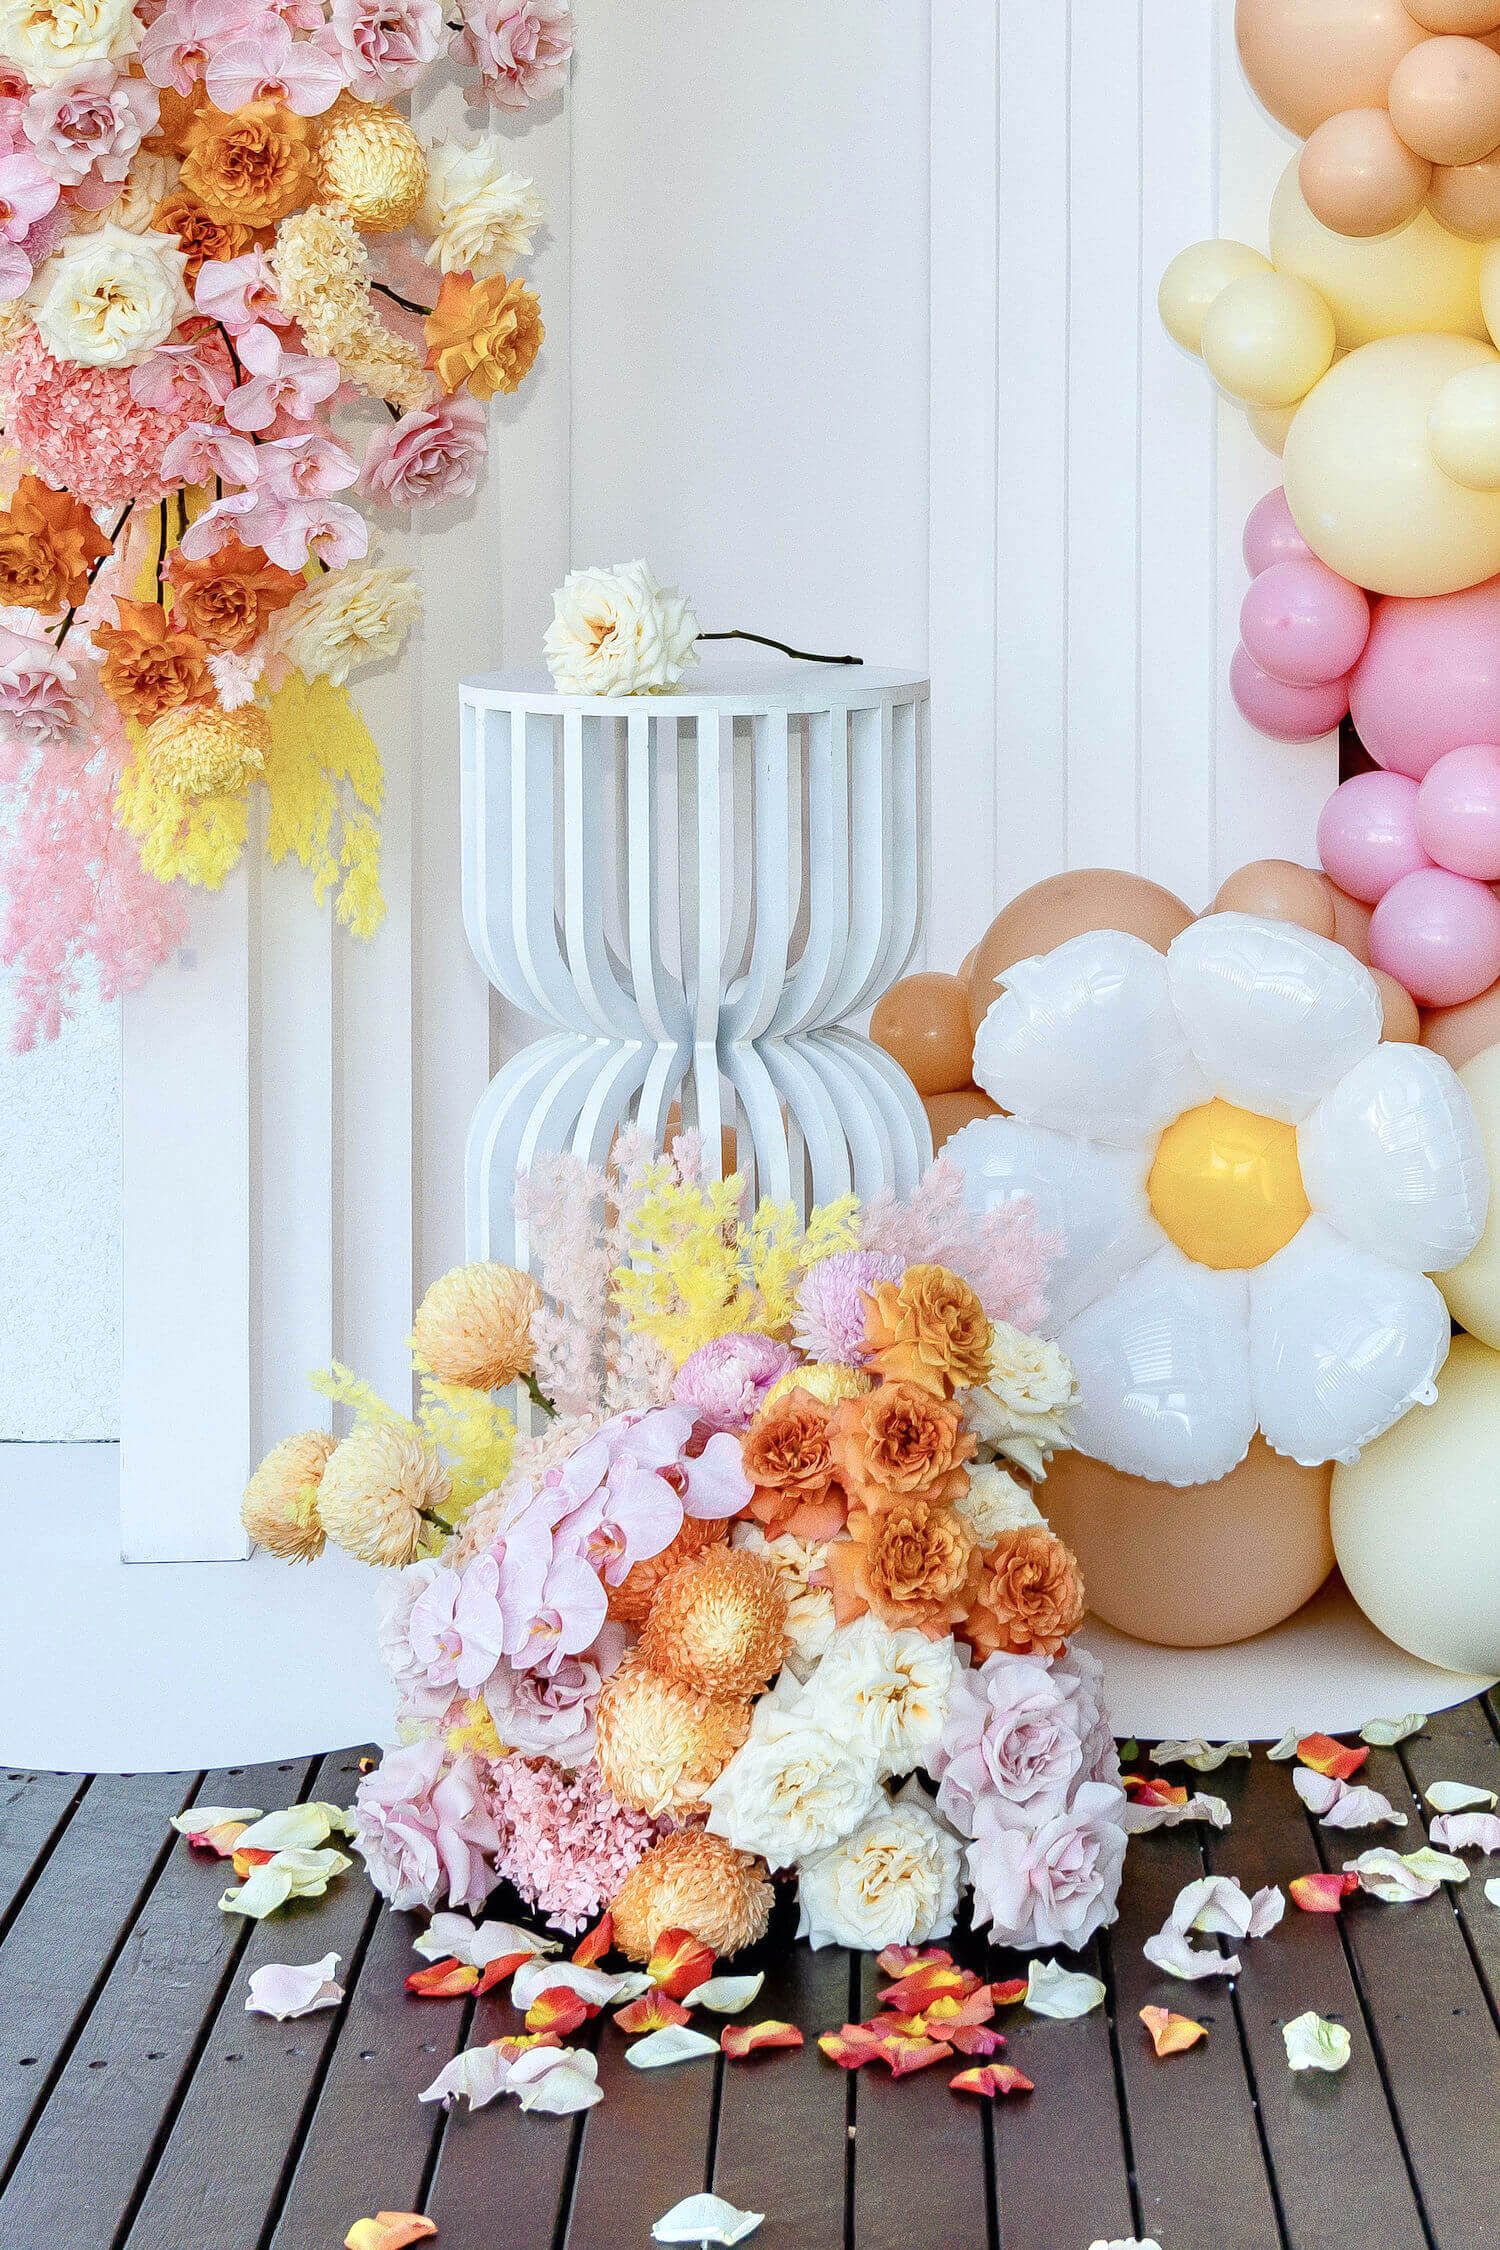 Event Styling Hire Brisbane Parties Balloon Styling Lunasity Photography Melanie Jane Weddings and Events